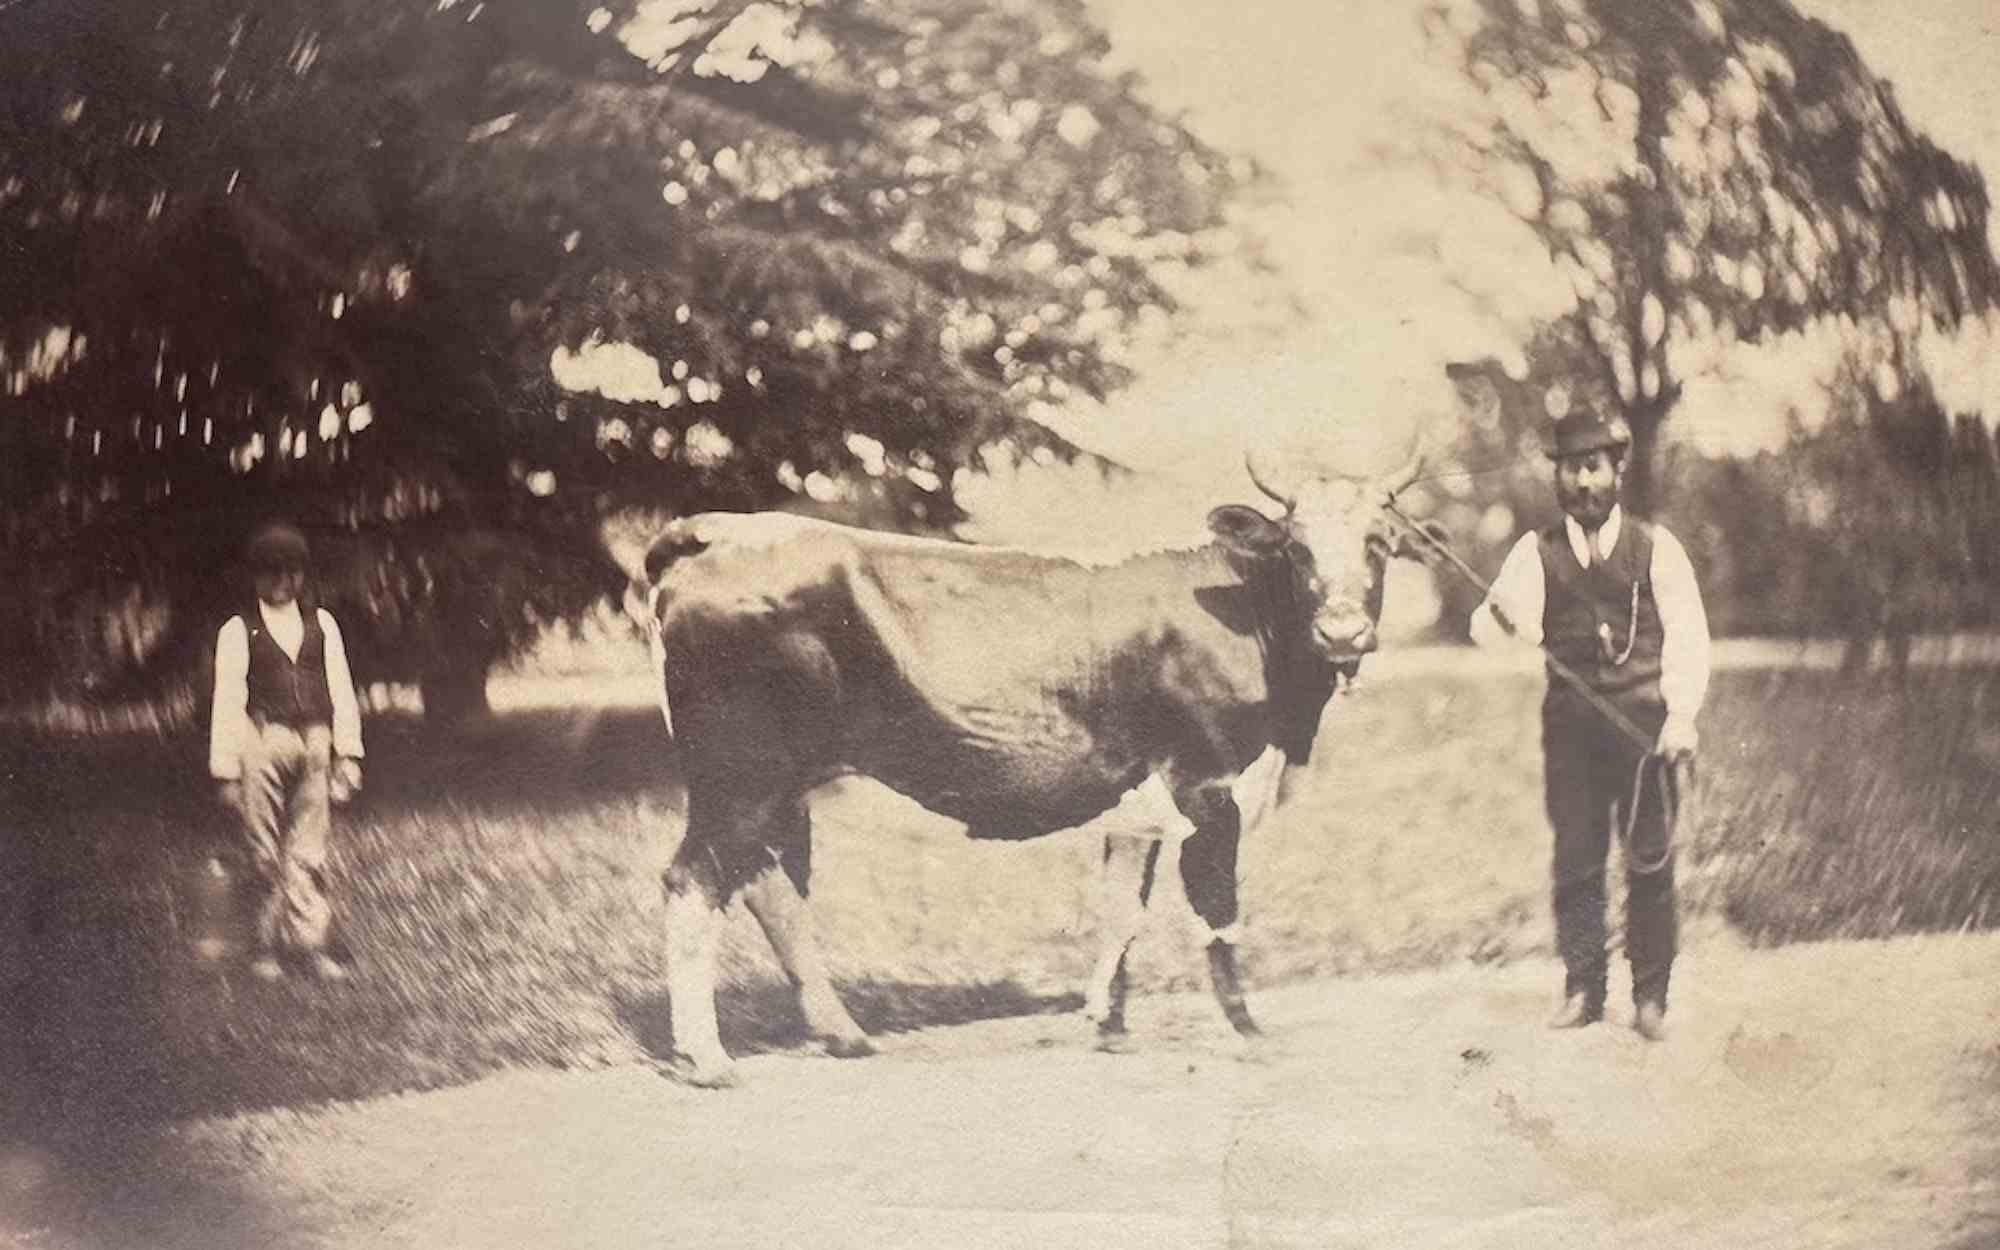 Unknown Figurative Photograph - The Old Days Photo - Cow in Tuscan Maremma - vintage photo - 20th Century